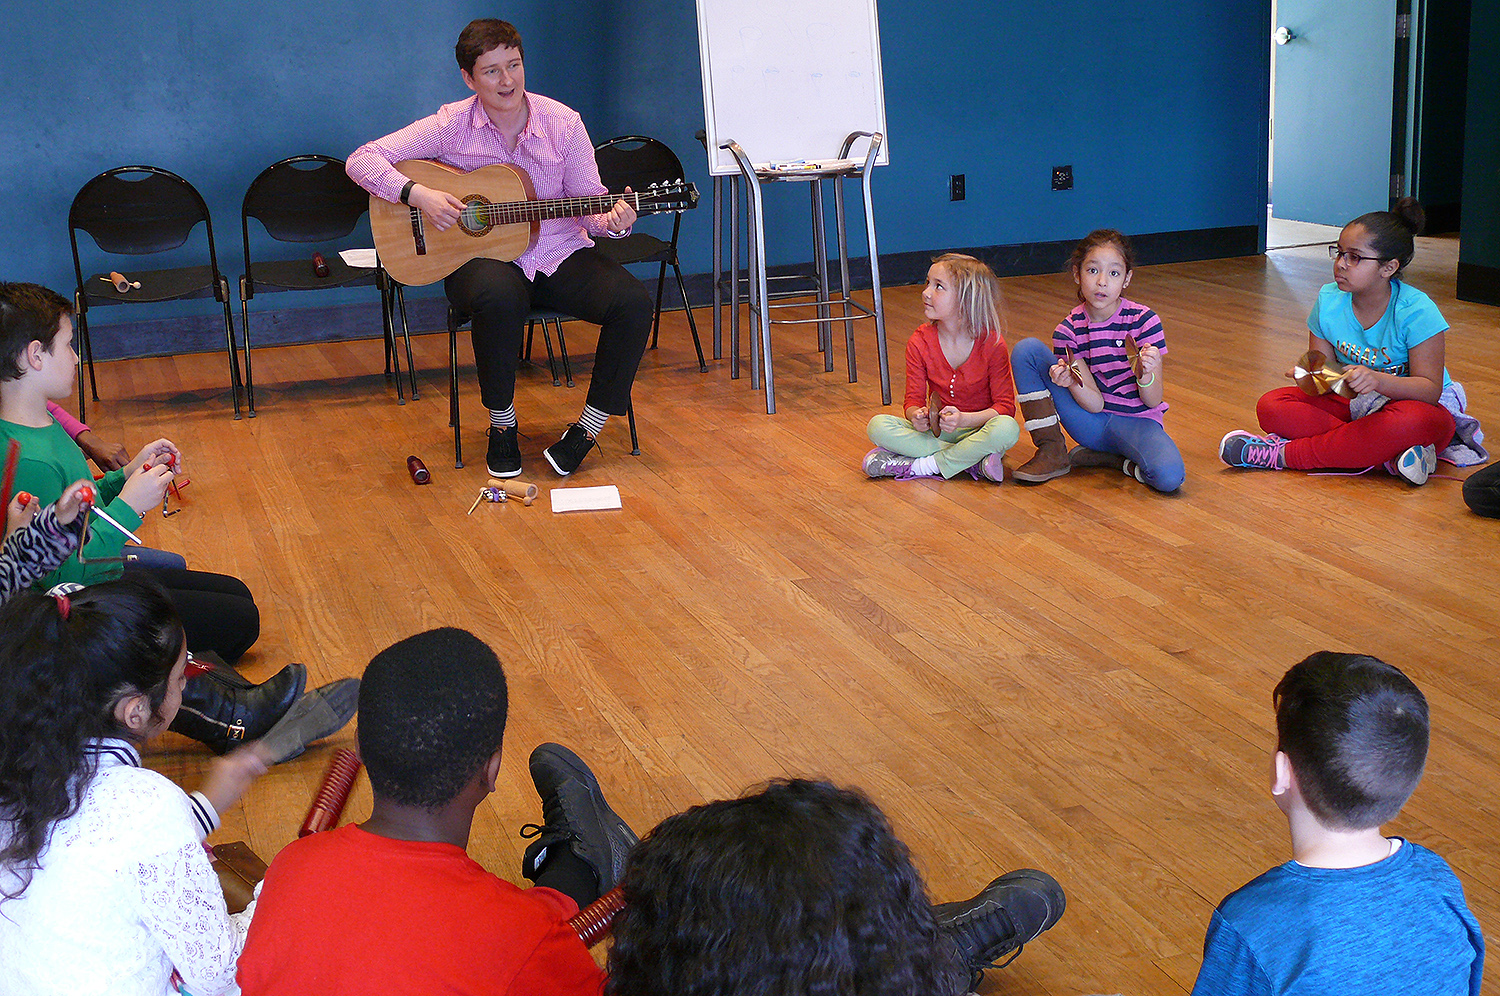 In line with Green Street’s mission to offer kids a safe space to build self-esteem, problem solving skills, and act upon their blossoming curiosities by providing a diverse group of role models to work with them, Potemkina’s program allowed the children to tap into their creative banks and explore the power of music.